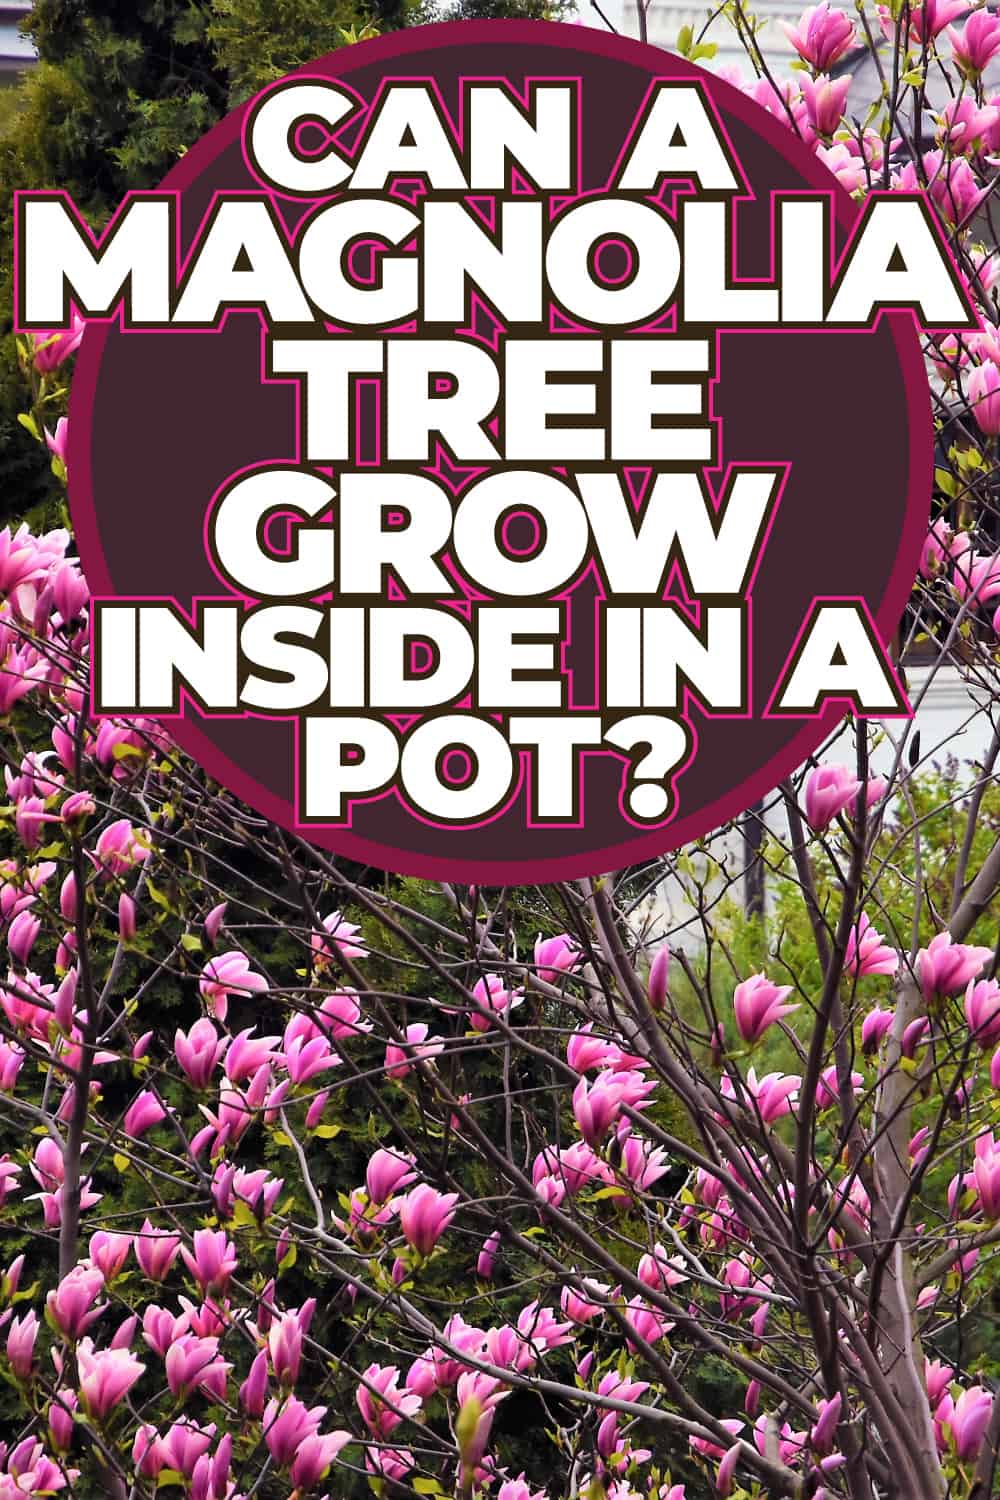 Can A Magnolia Tree Grow Inside In A Pot?